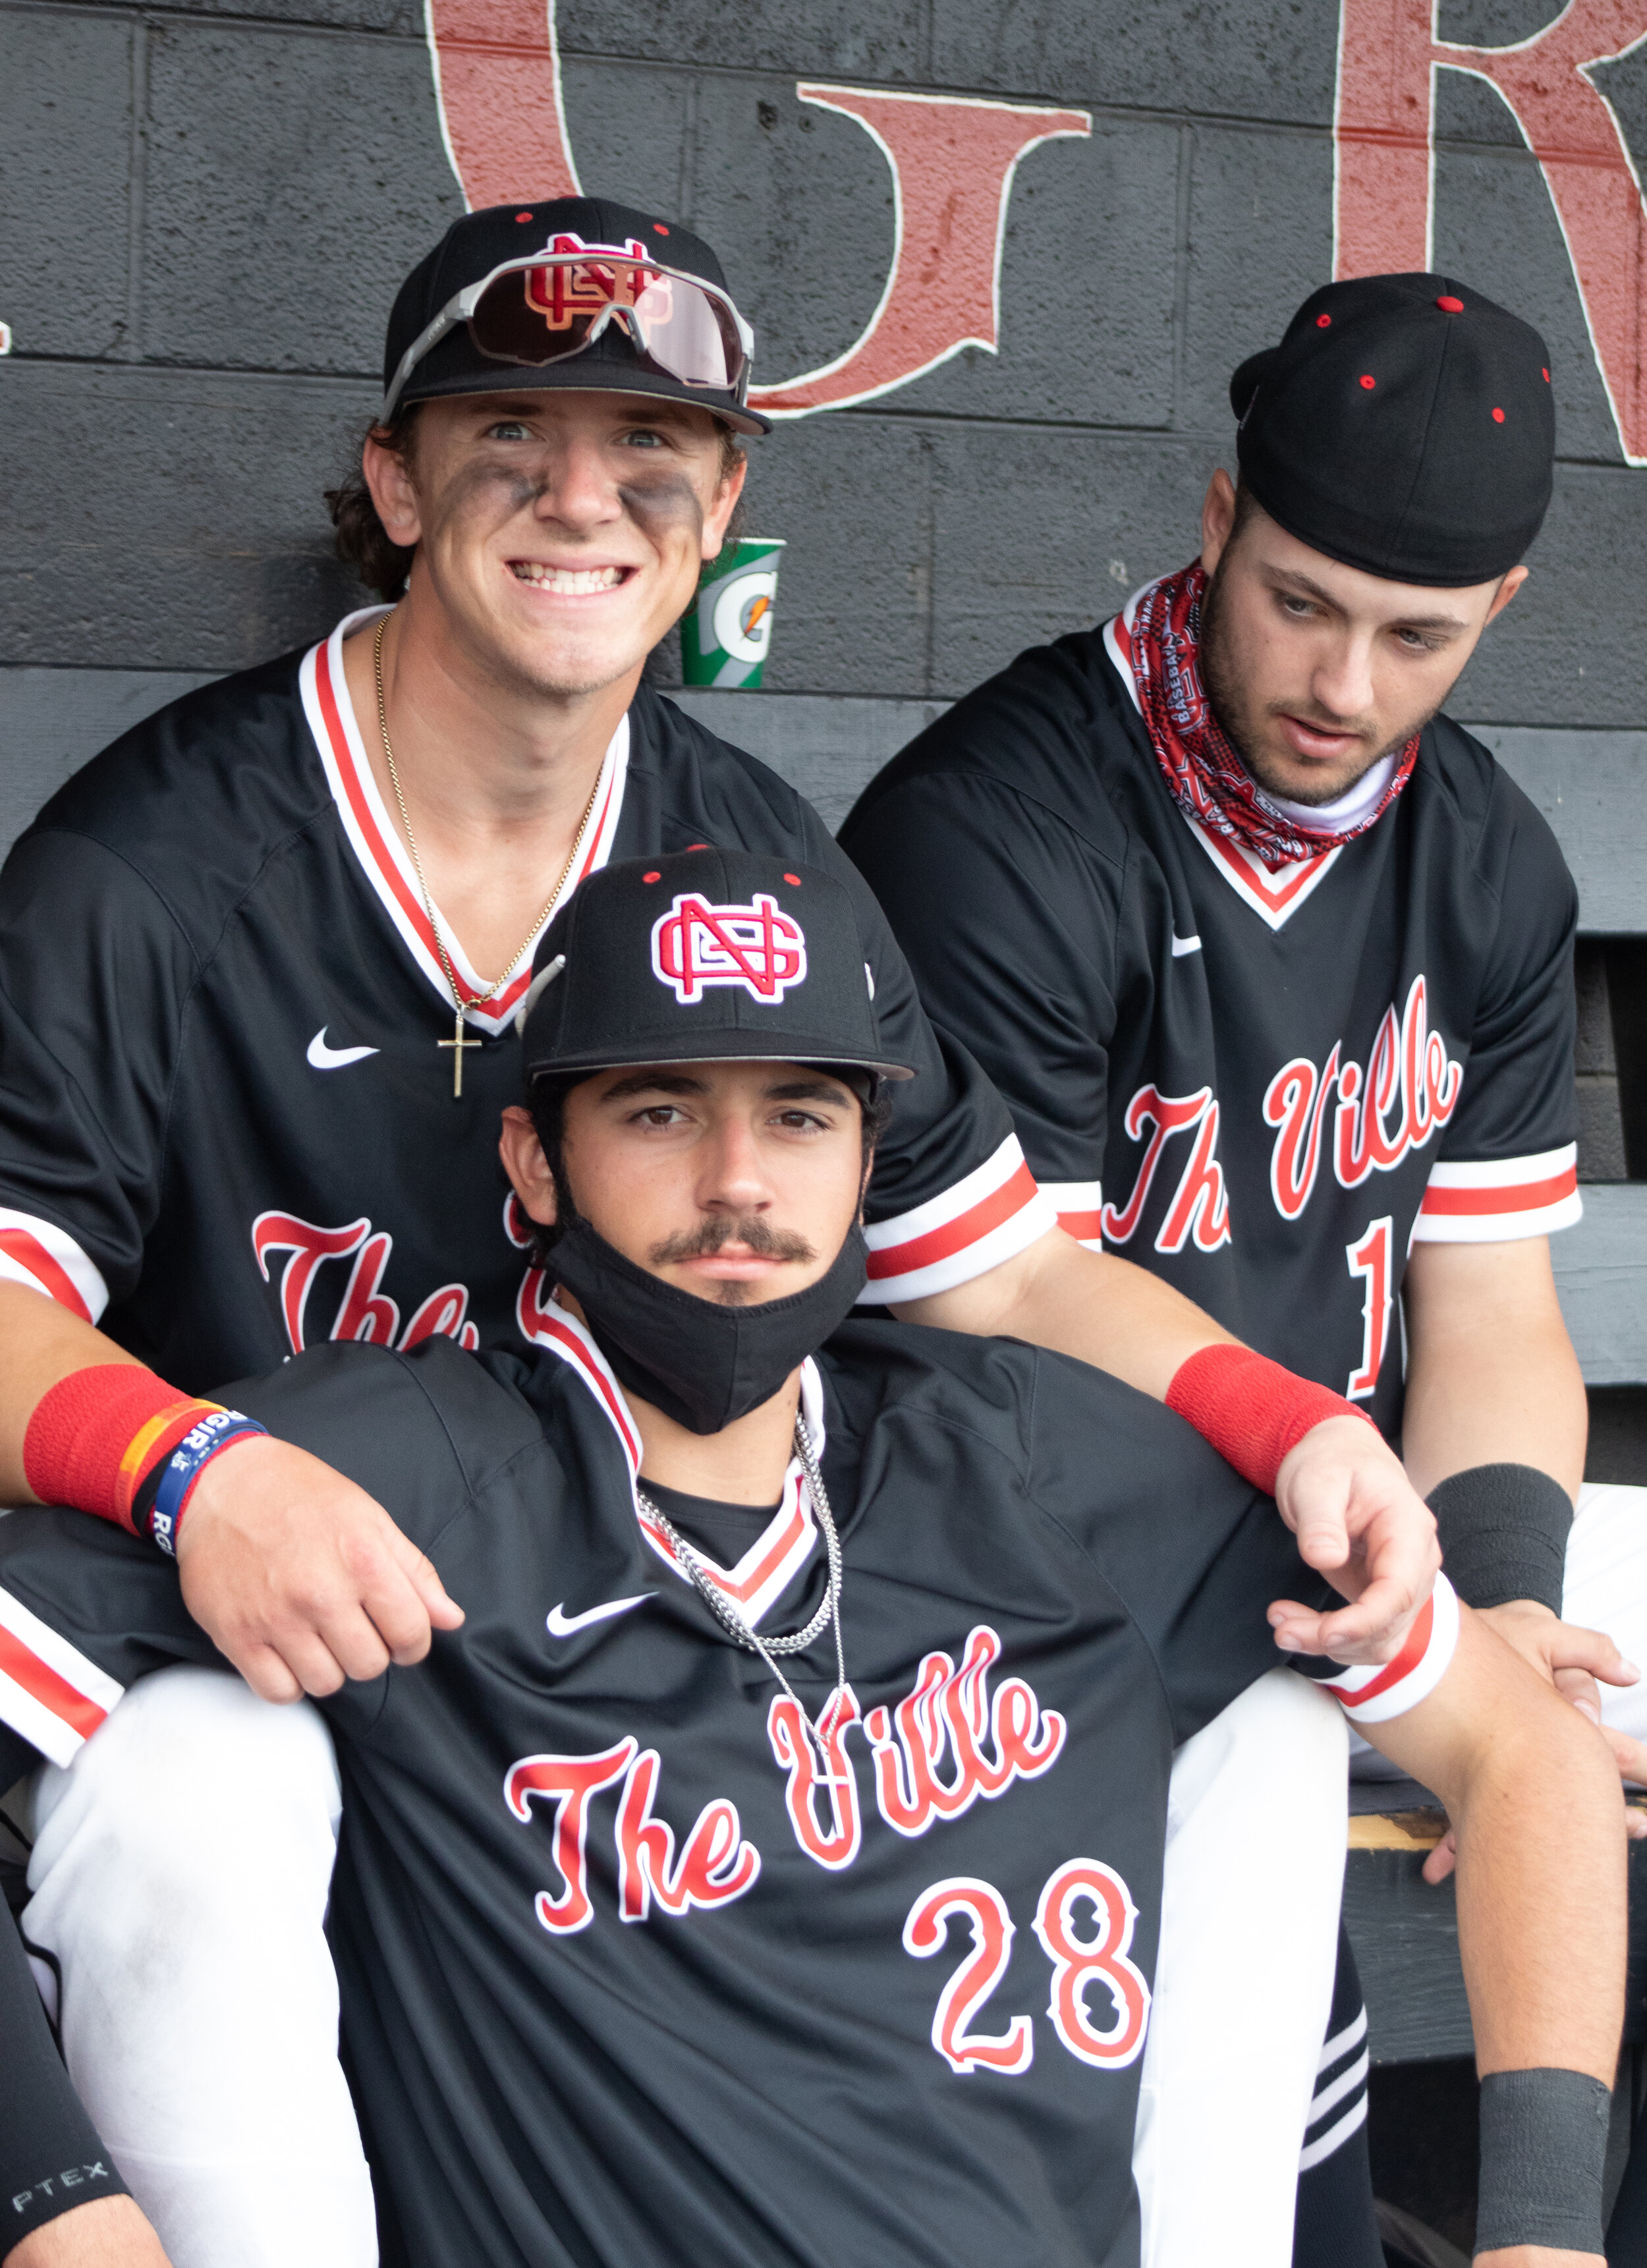 Second baseman Doug Angeli, outfielder AJ Kaminsky and first baseman Dawson Price pose in the dugout as they cheer their teammates on.